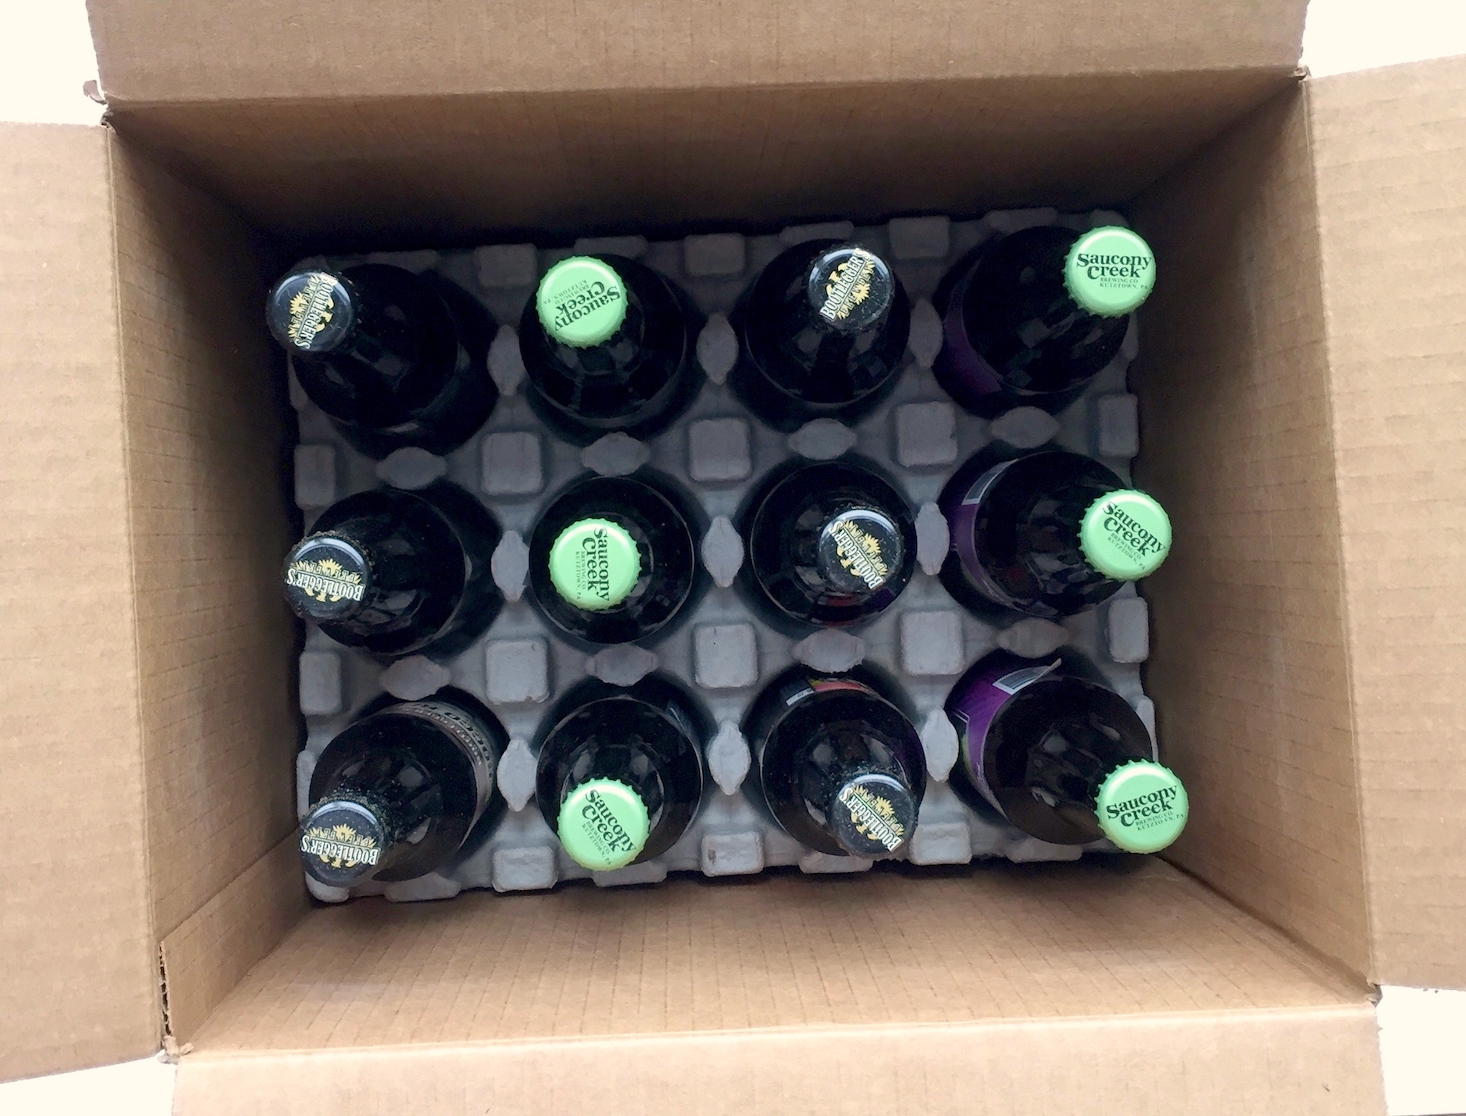 Craft-beer-club-january-2017-box-open